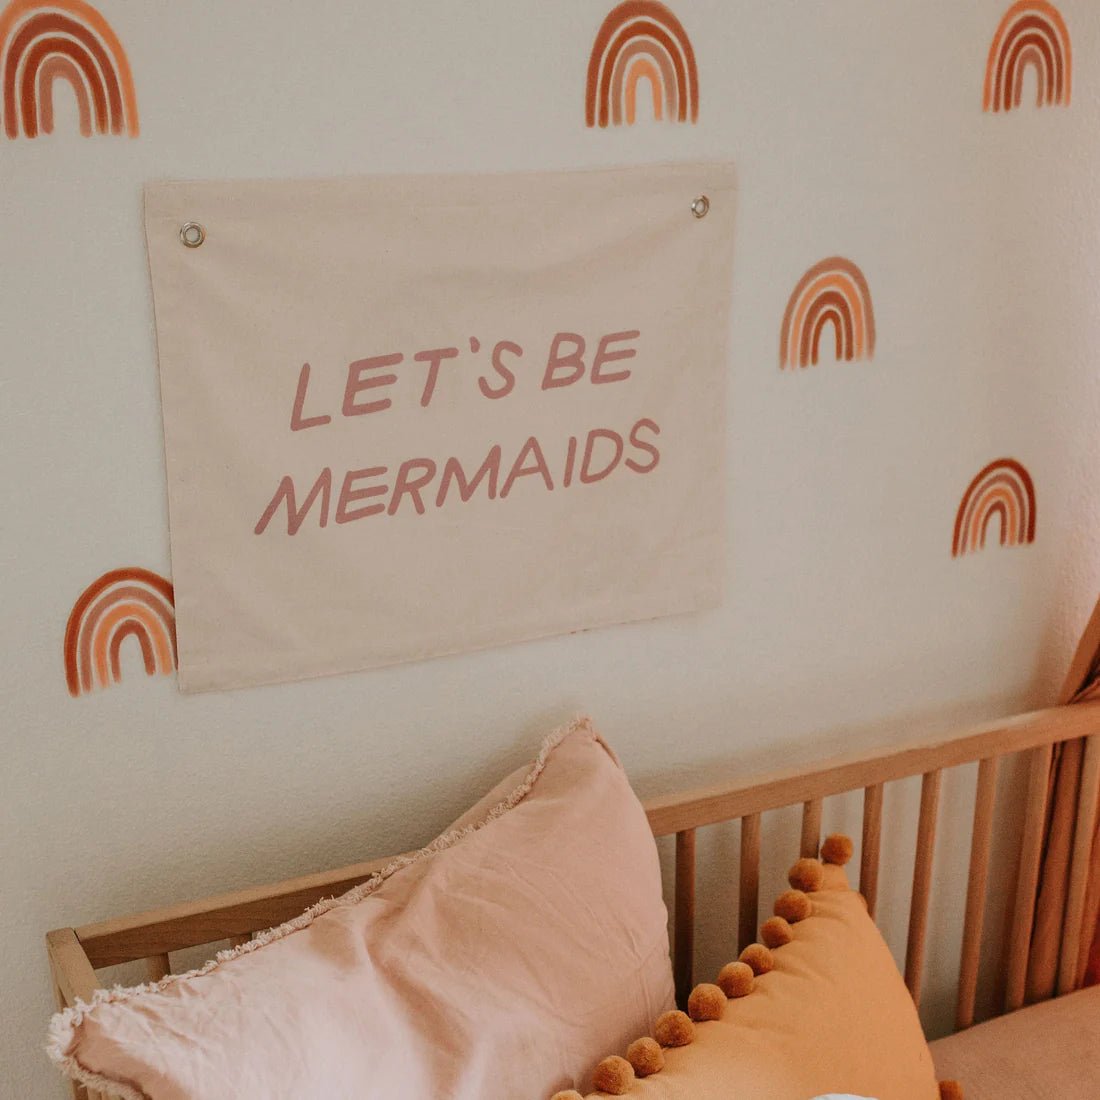 Let's Be Mermaids Canvas Banner by Imani Collective - Maude Kids Decor